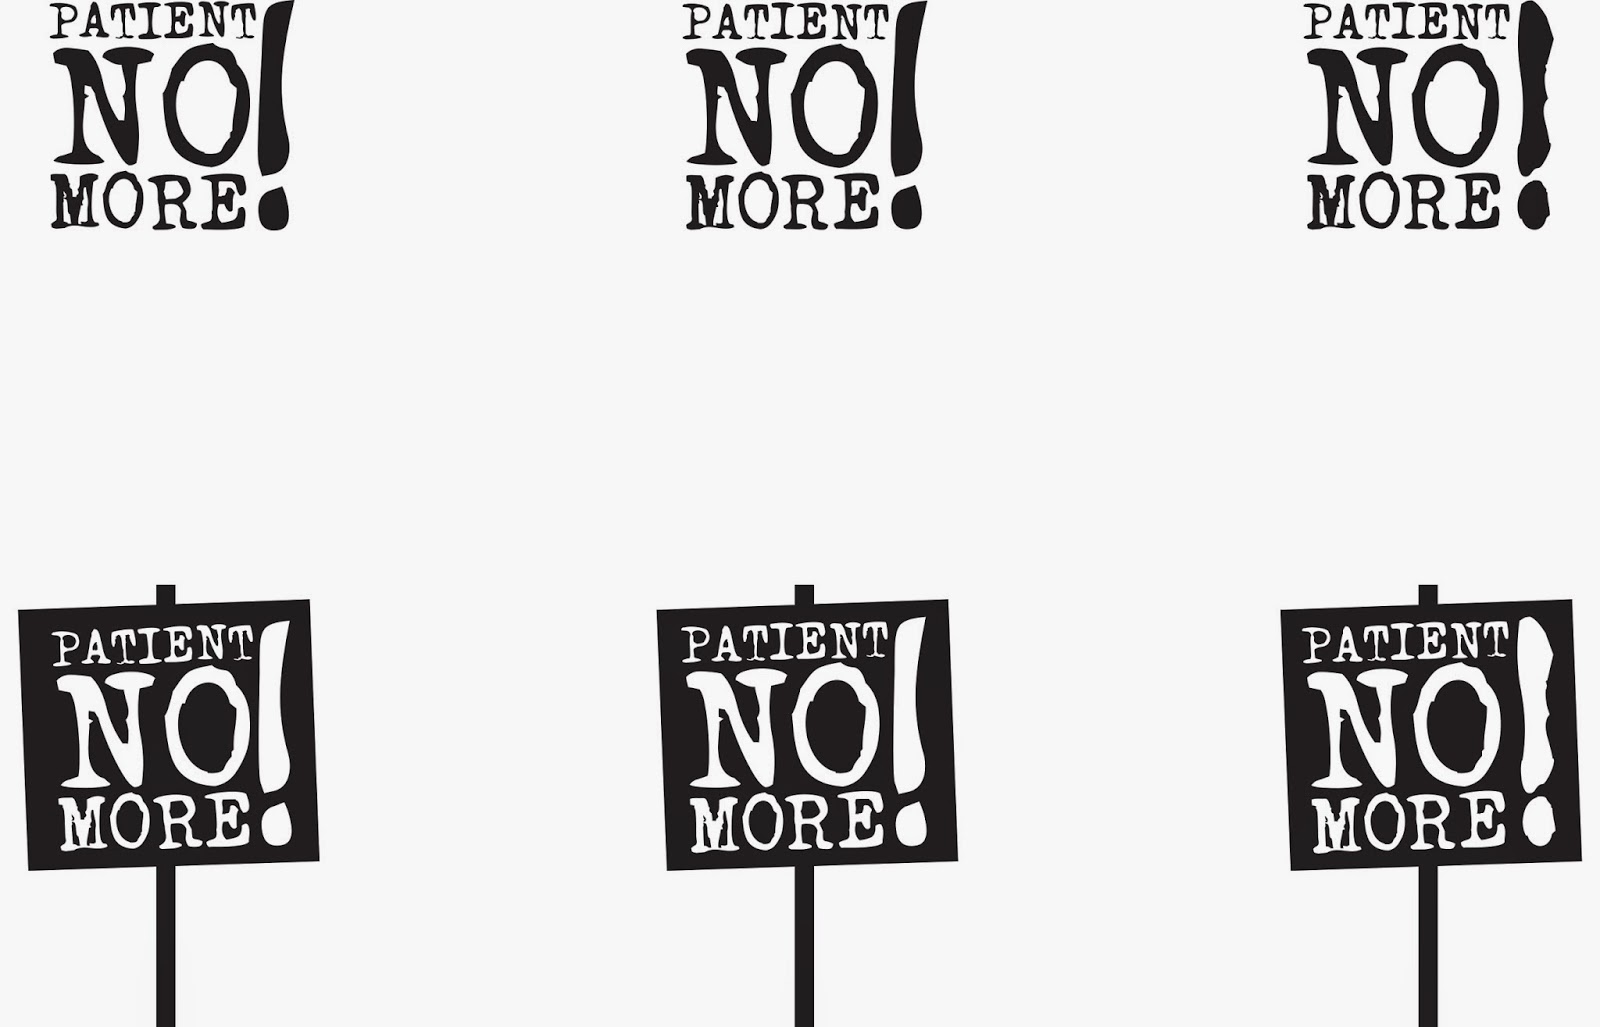 Two rows of logo variations. The top row is primarily text, reading "Patient No More!" with a large exclamation point in typewriter font.  The second row is the same text in white on a background of a protest picket sign.